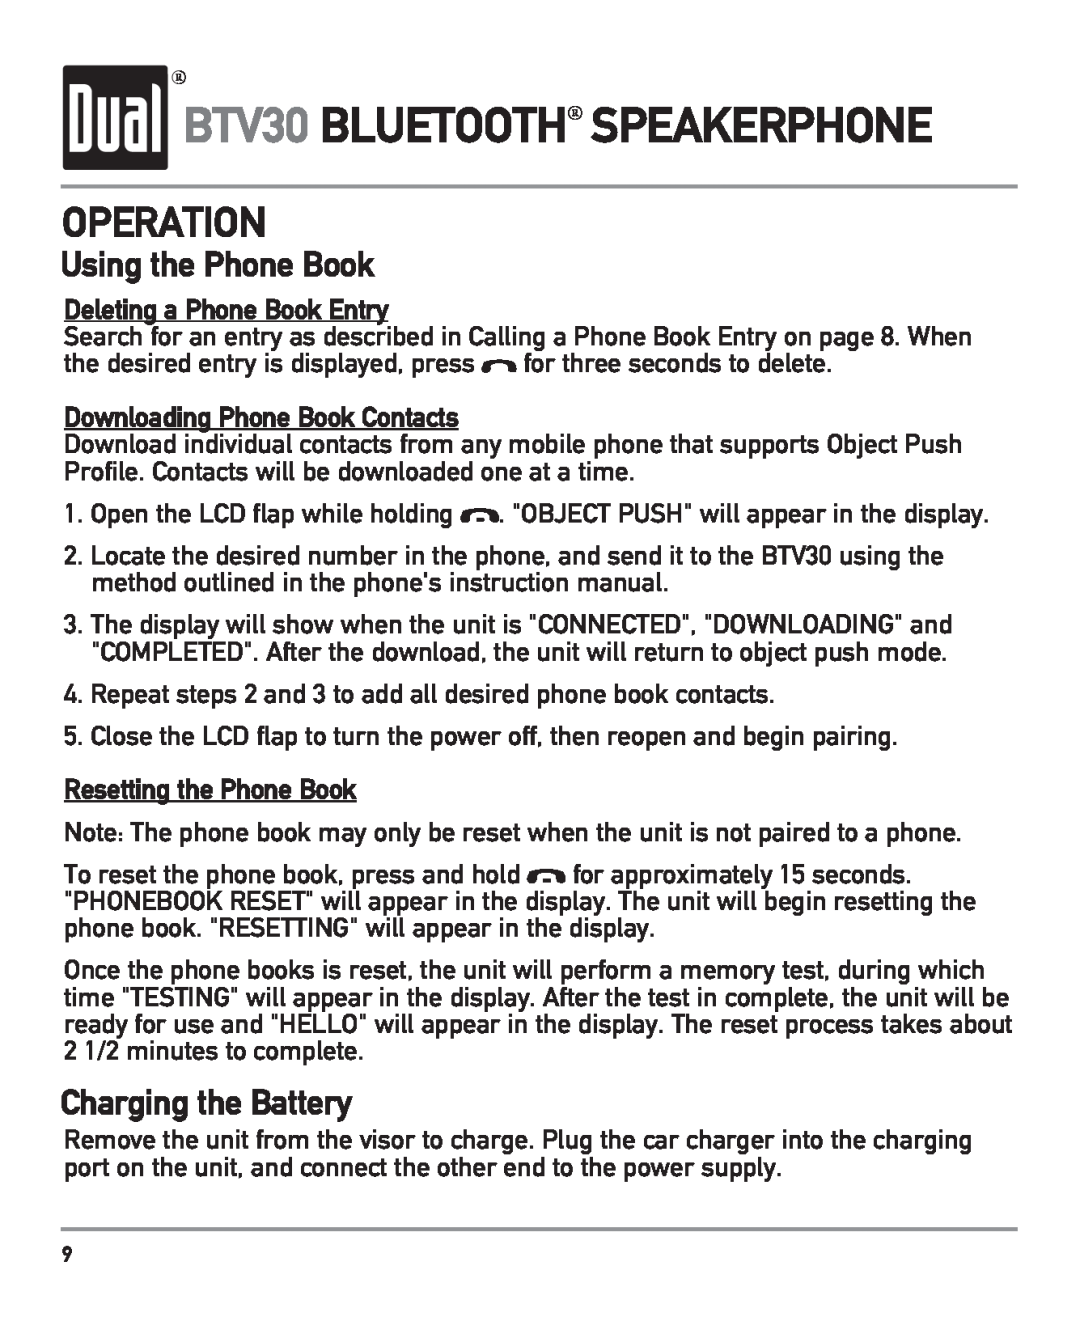 Dual BTV30 Charging the Battery, Deleting a Phone Book Entry, Downloading Phone Book Contacts, Resetting the Phone Book 